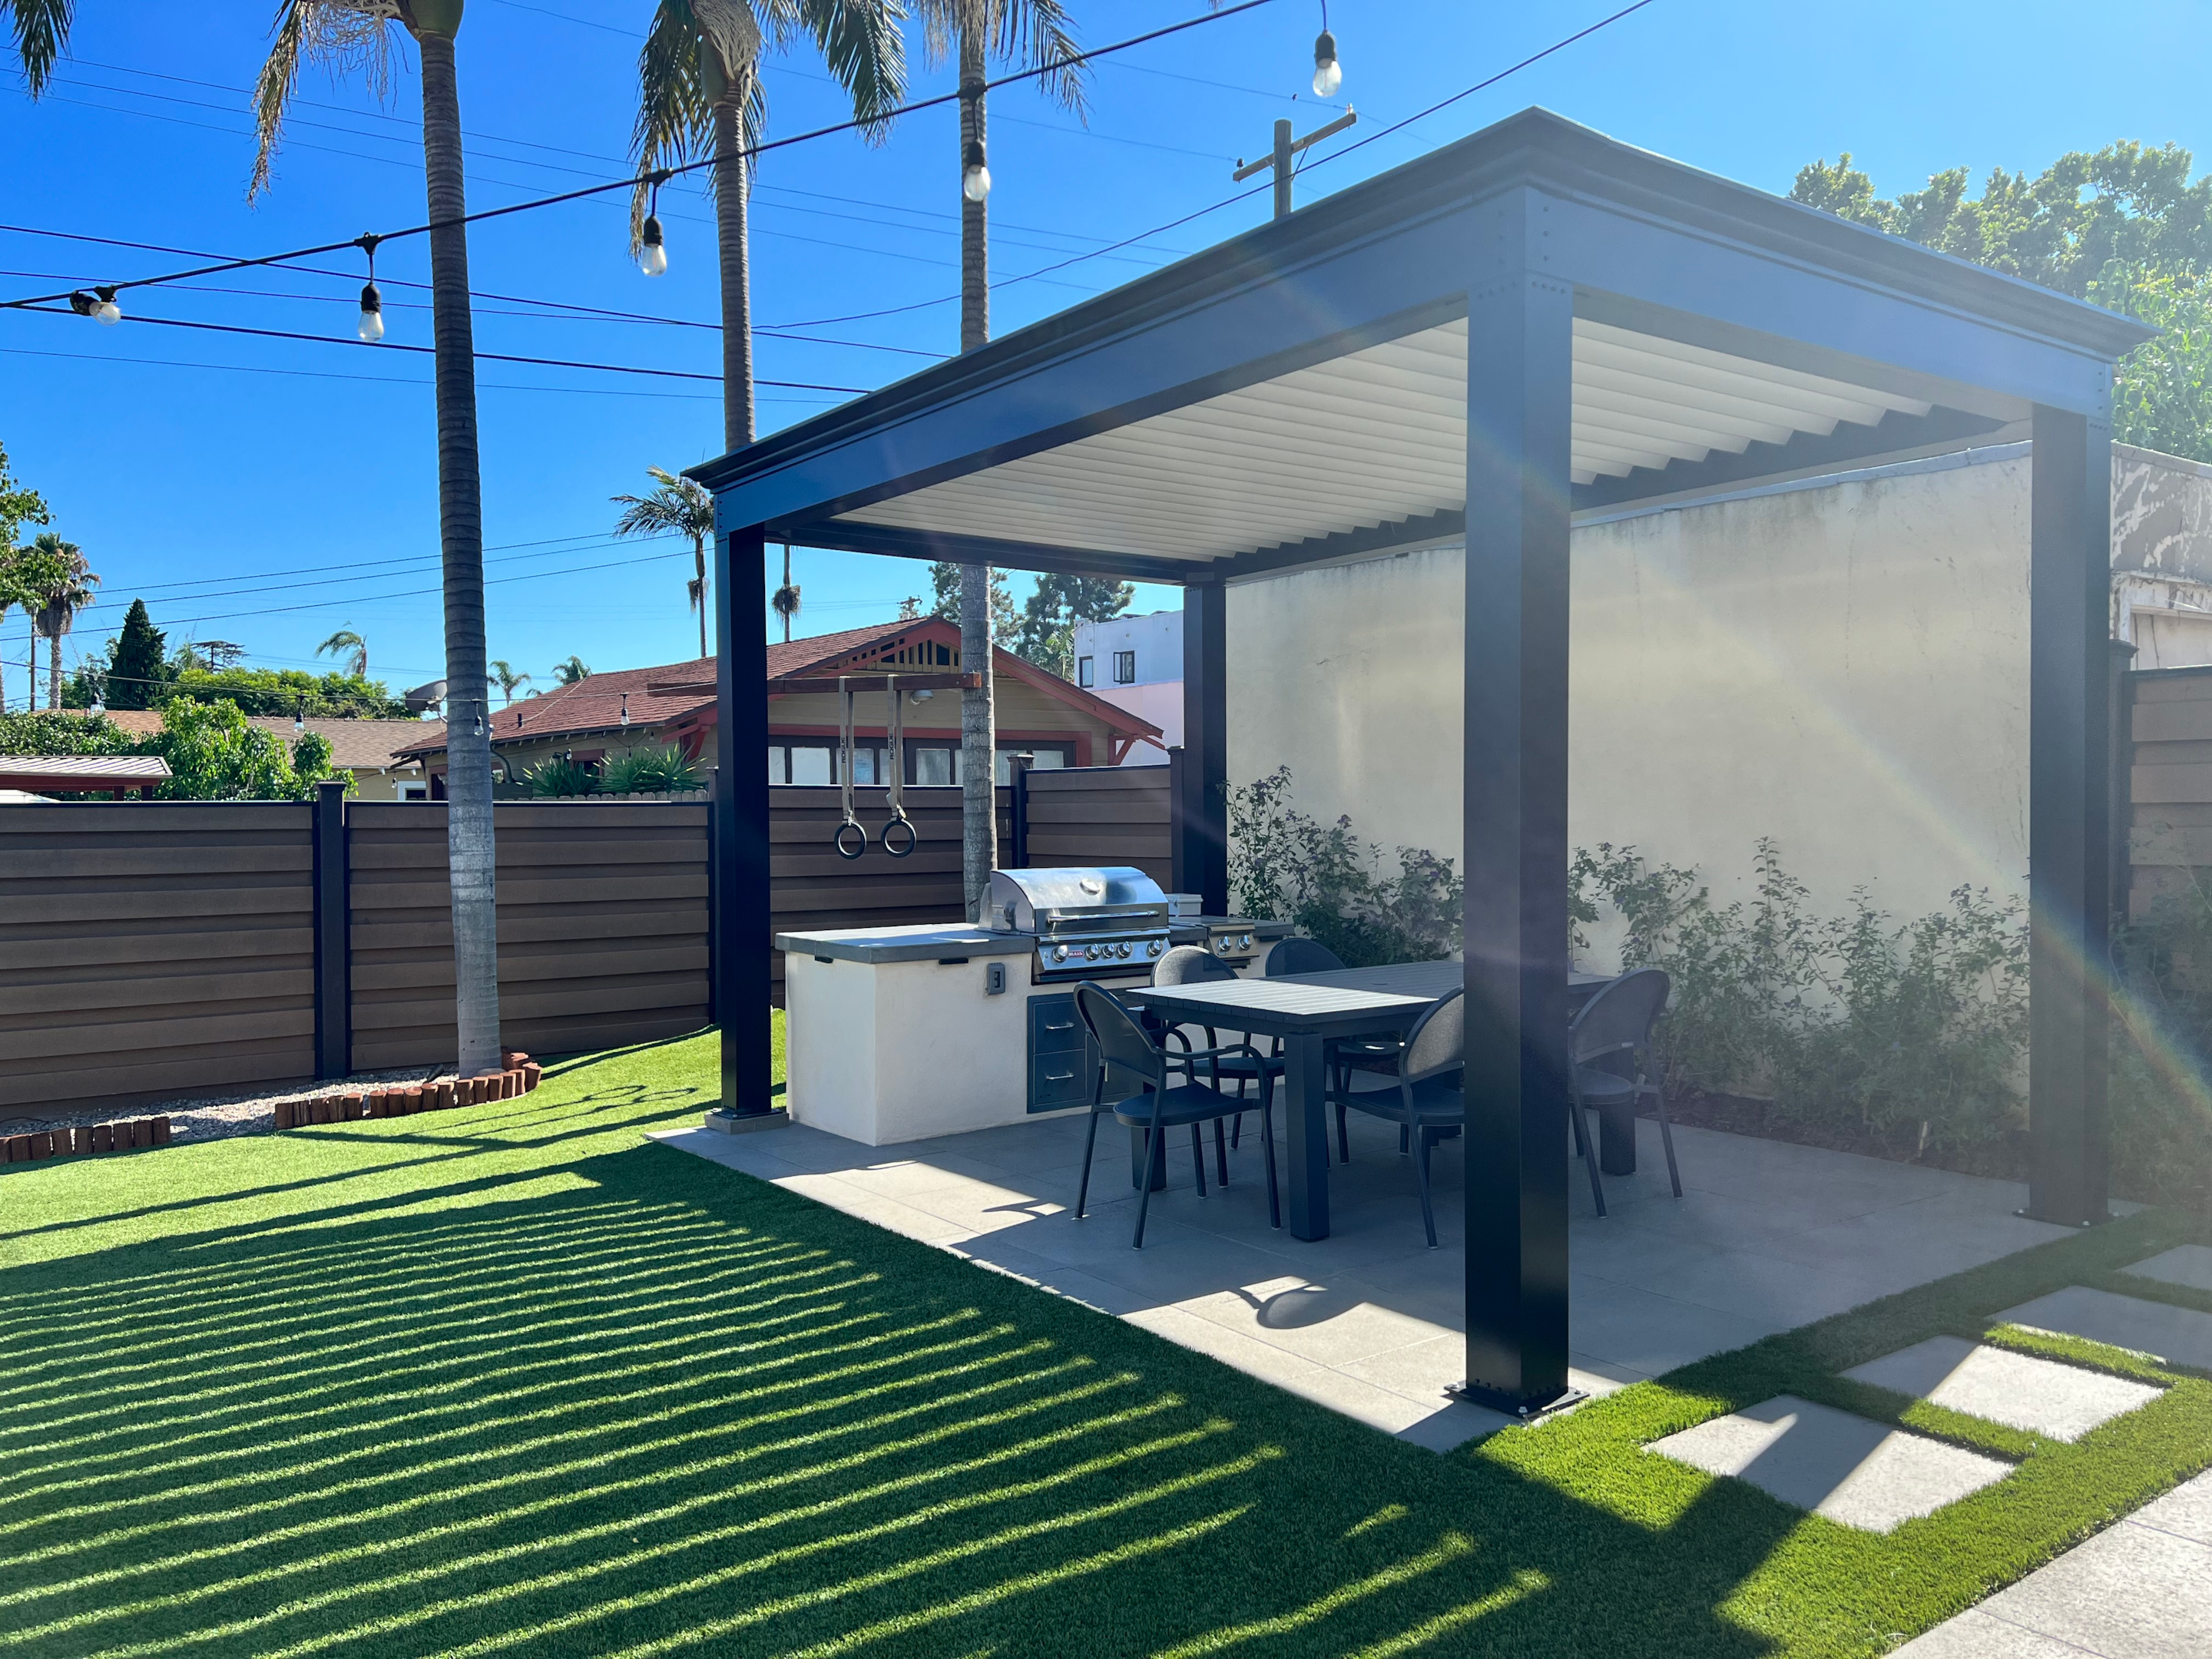 Motorized pergola kit with louvered roof. High winds and sun exposure can finally be tamed!